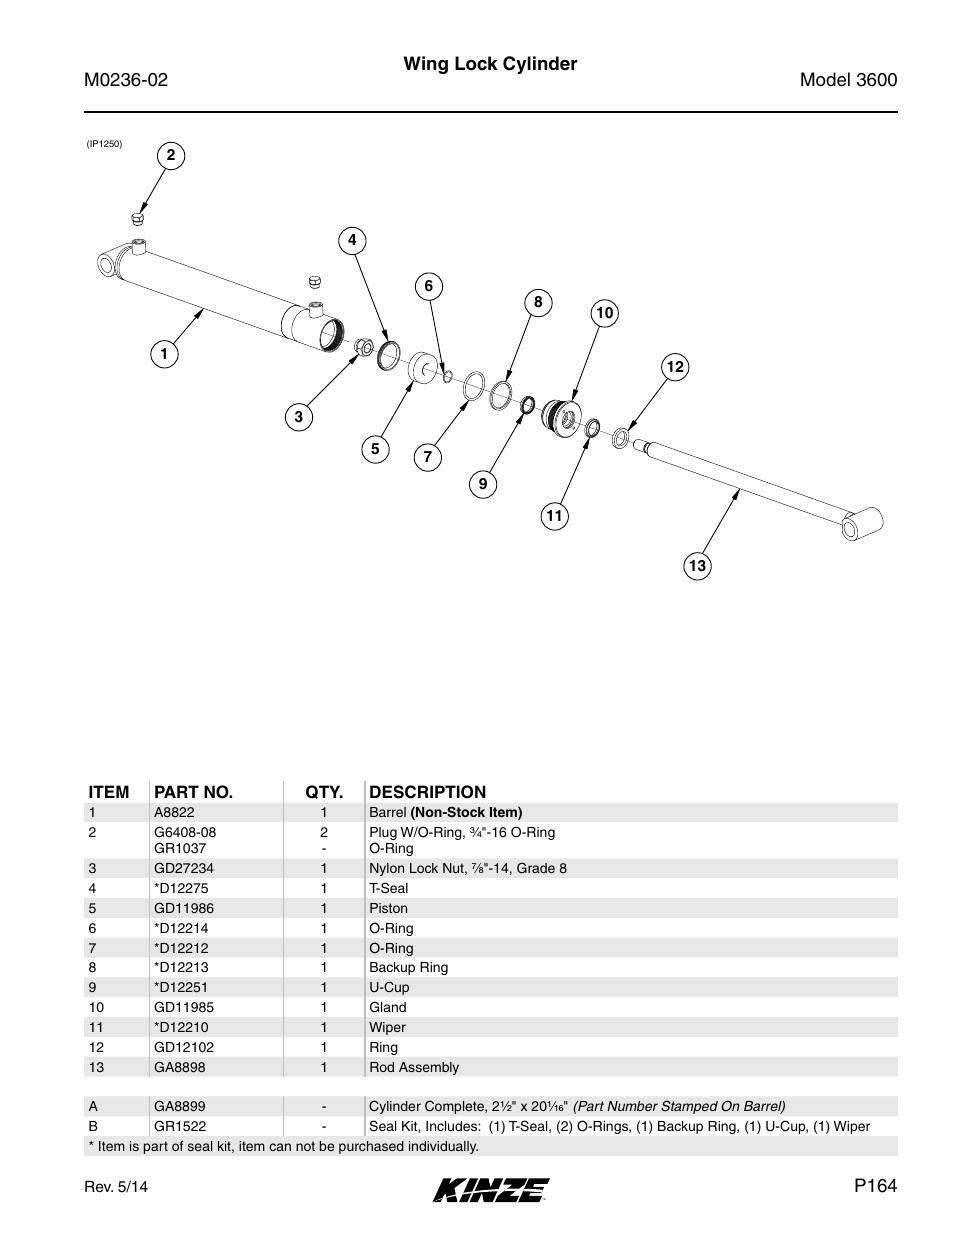 Wing lock cylinder, P164 | Kinze 3600 Lift and Rotate Planter Rev. 5/14 User Manual | Page 167 / 302